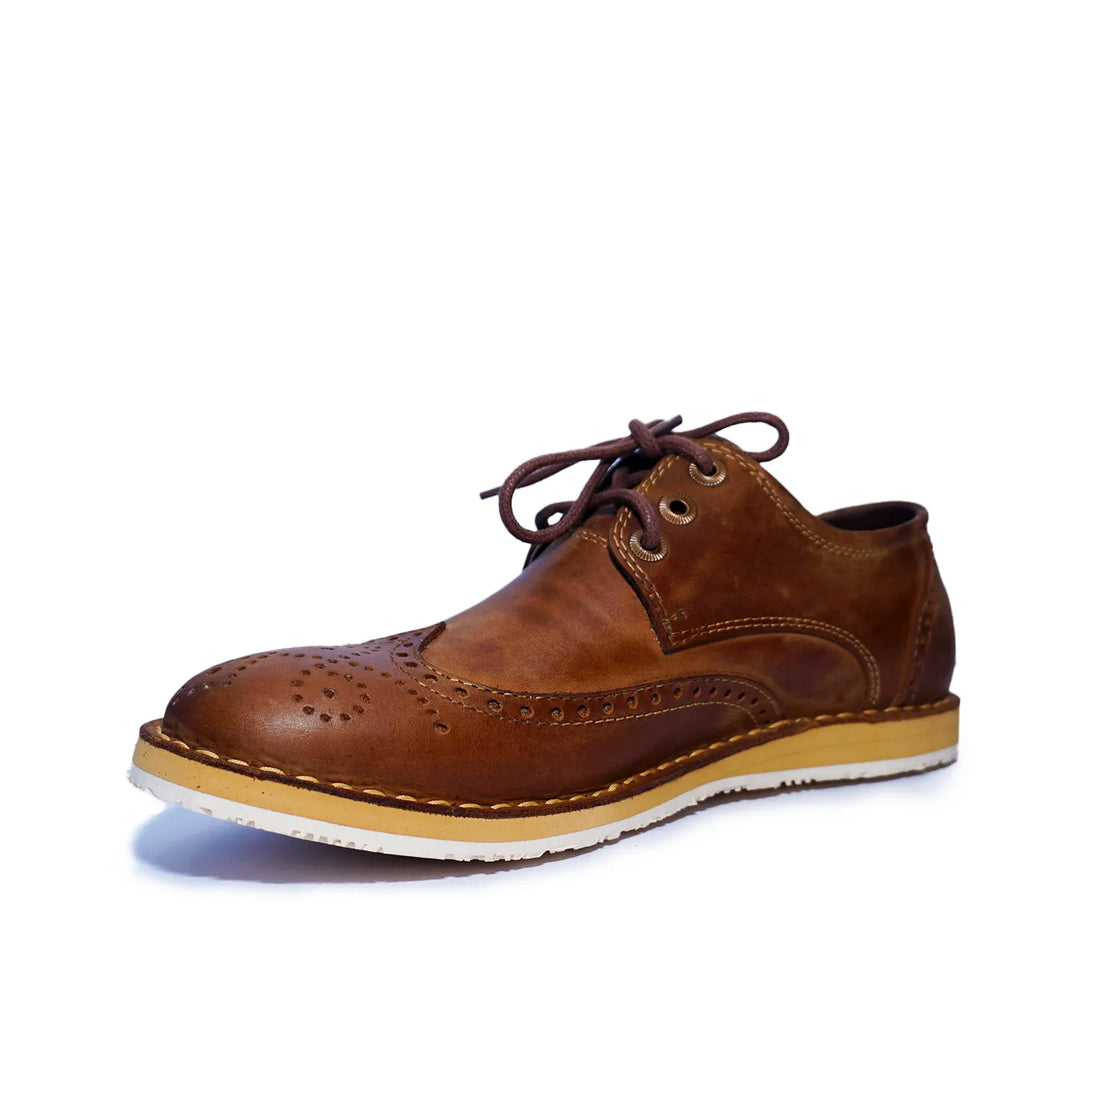 Stellar Brown Leather Shoes